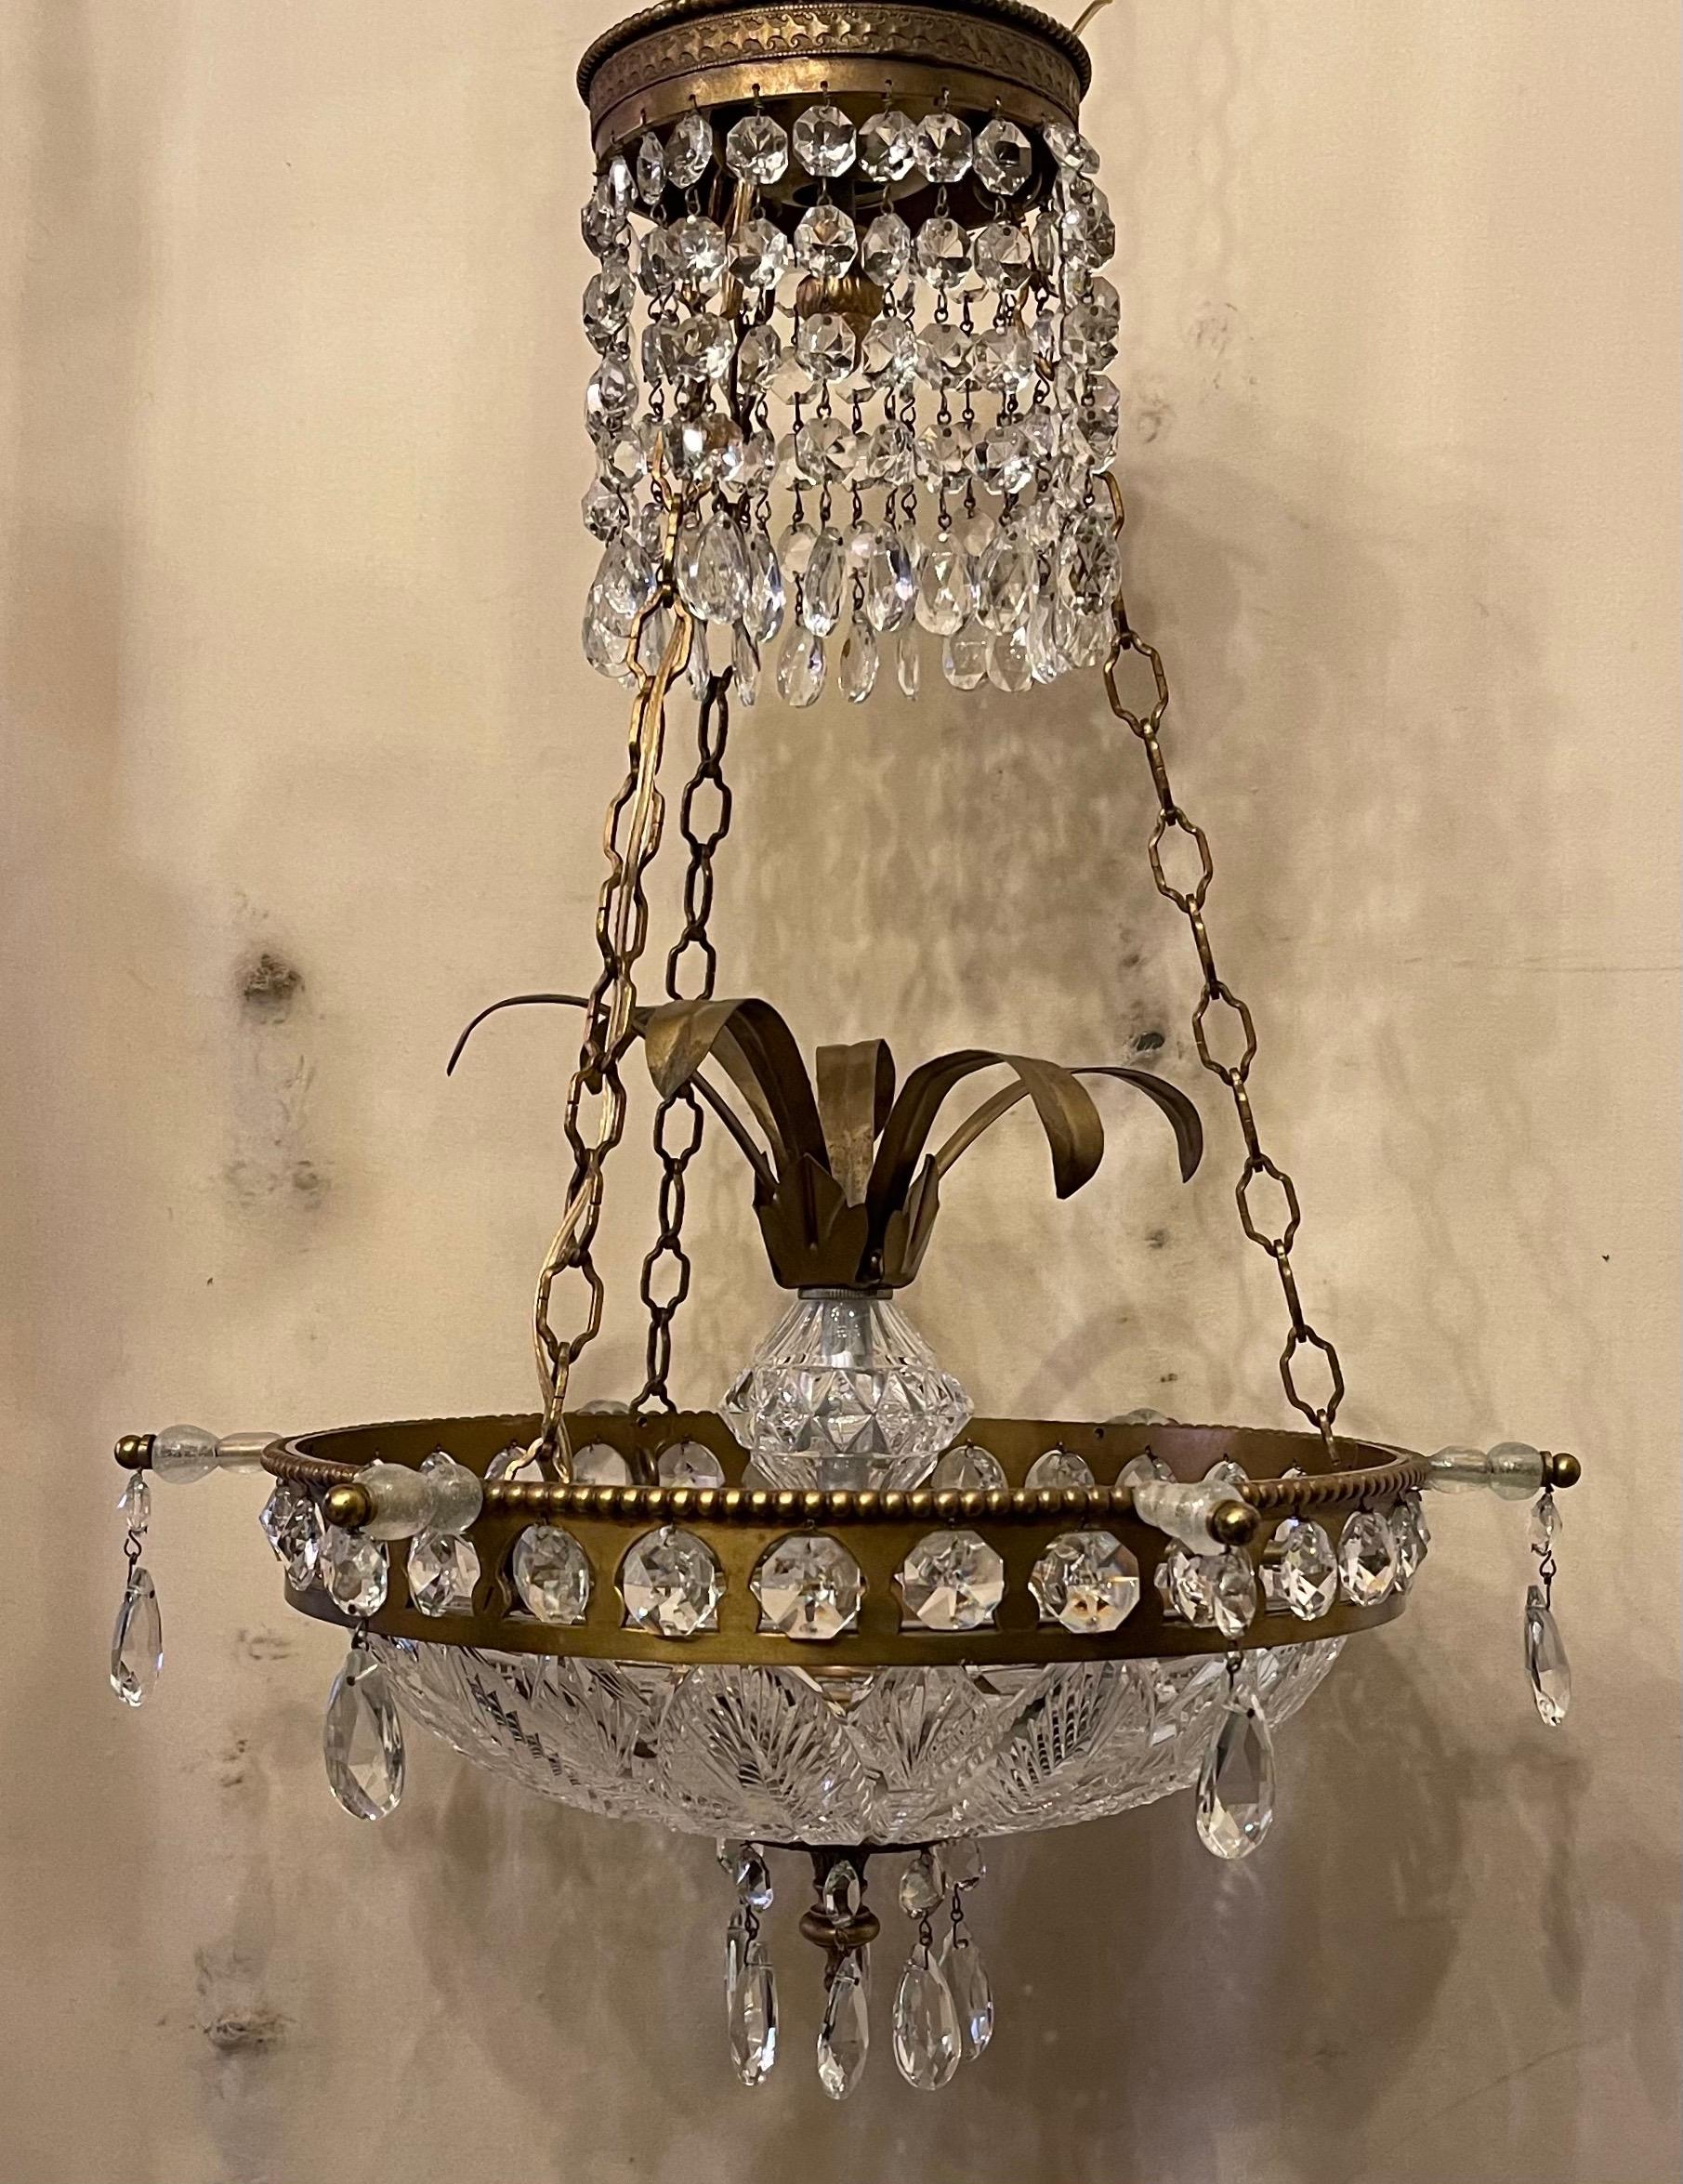 A wonderful neoclassical etched cut-crystal fern bowl with bronze ormolu housing chandelier, this fixture is currently 20